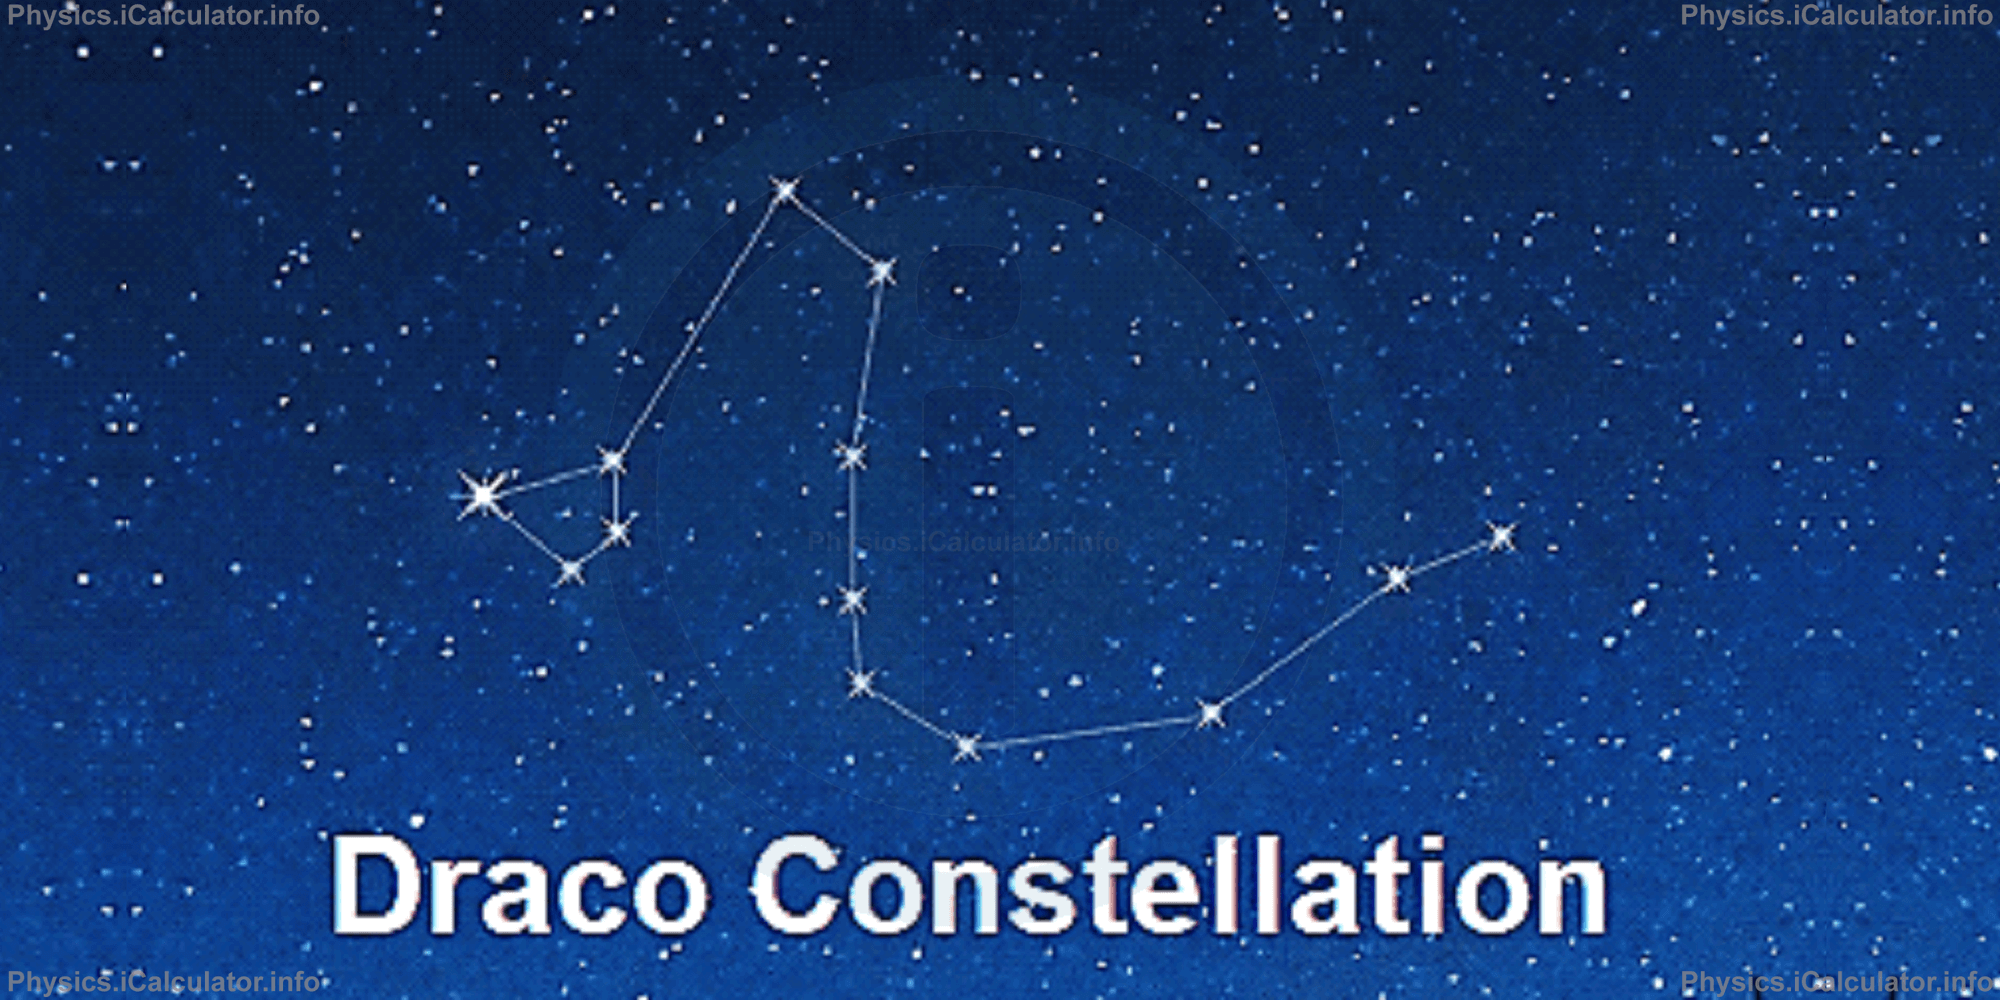 Physics Tutorials: This image provides visual information for the physics tutorial Orientation in the Sky and Constellations 